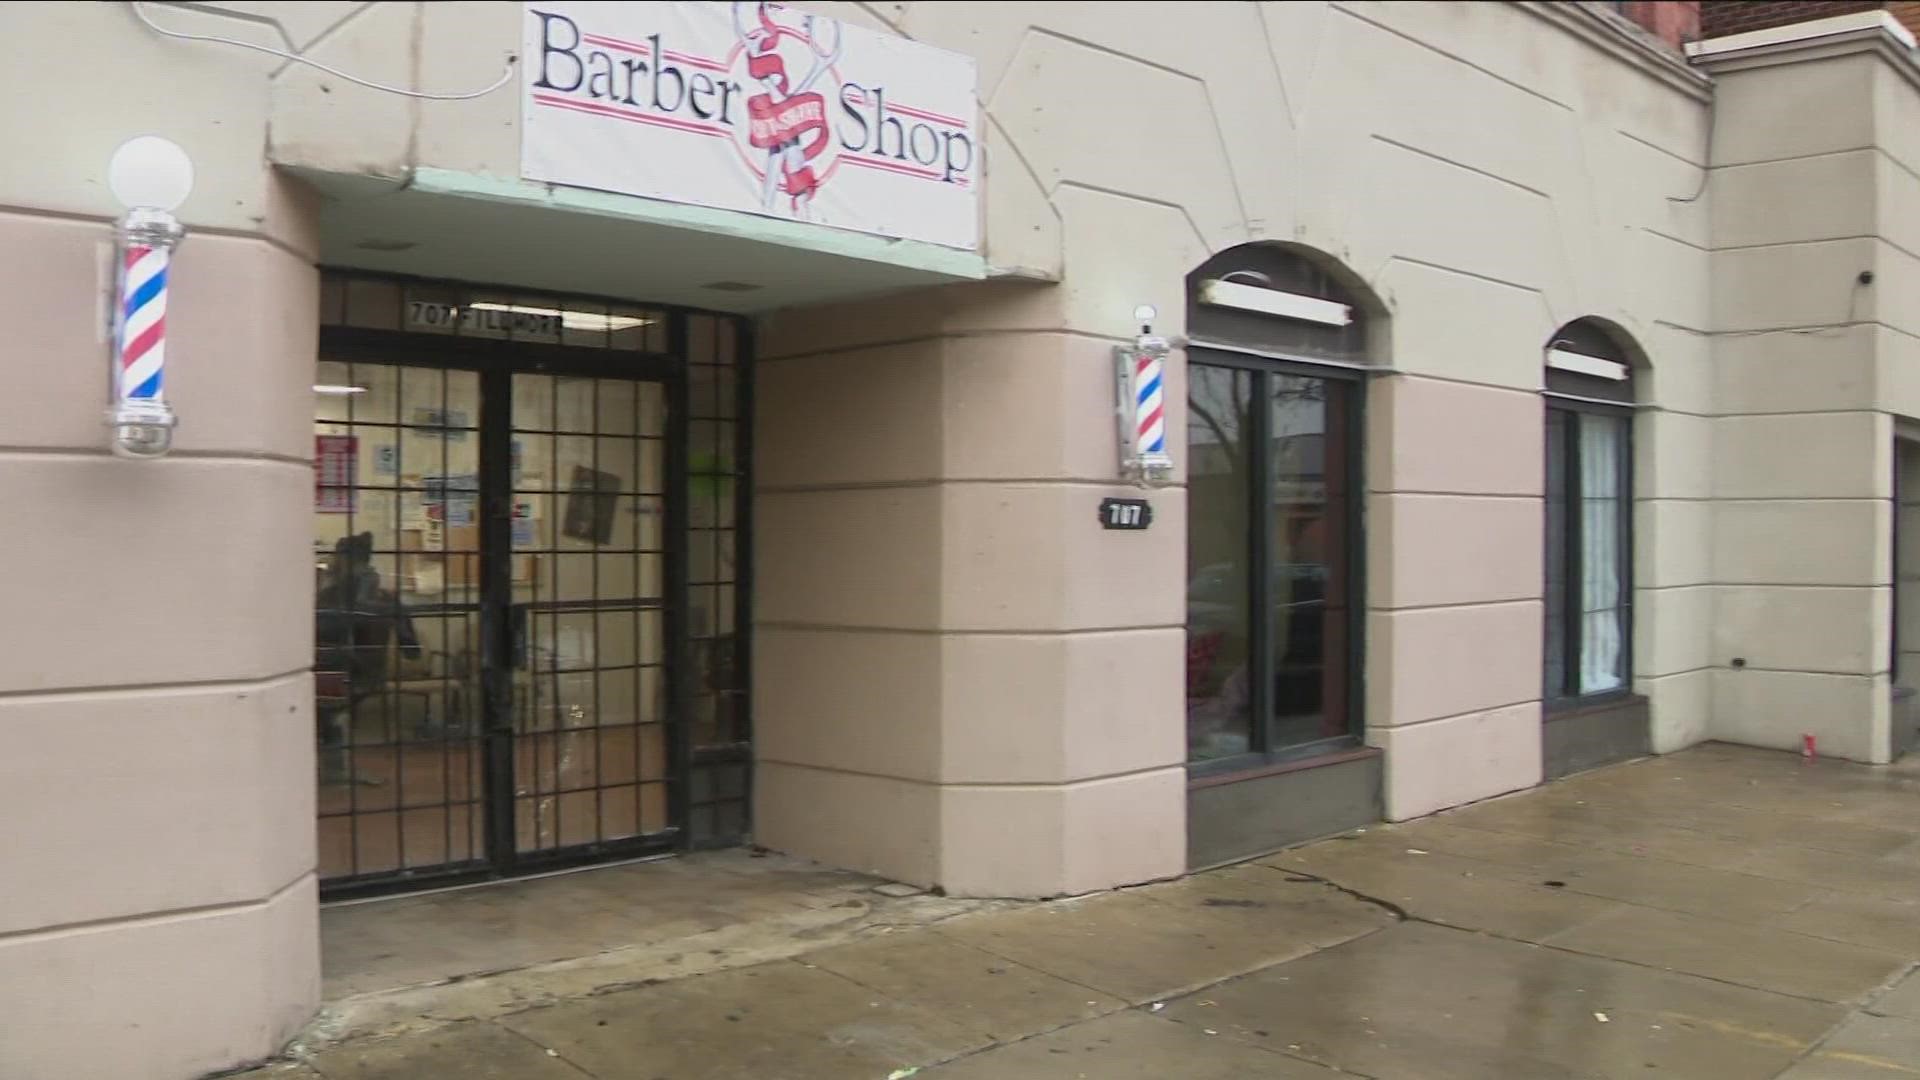 Barbershop turns into shelter during blizzard